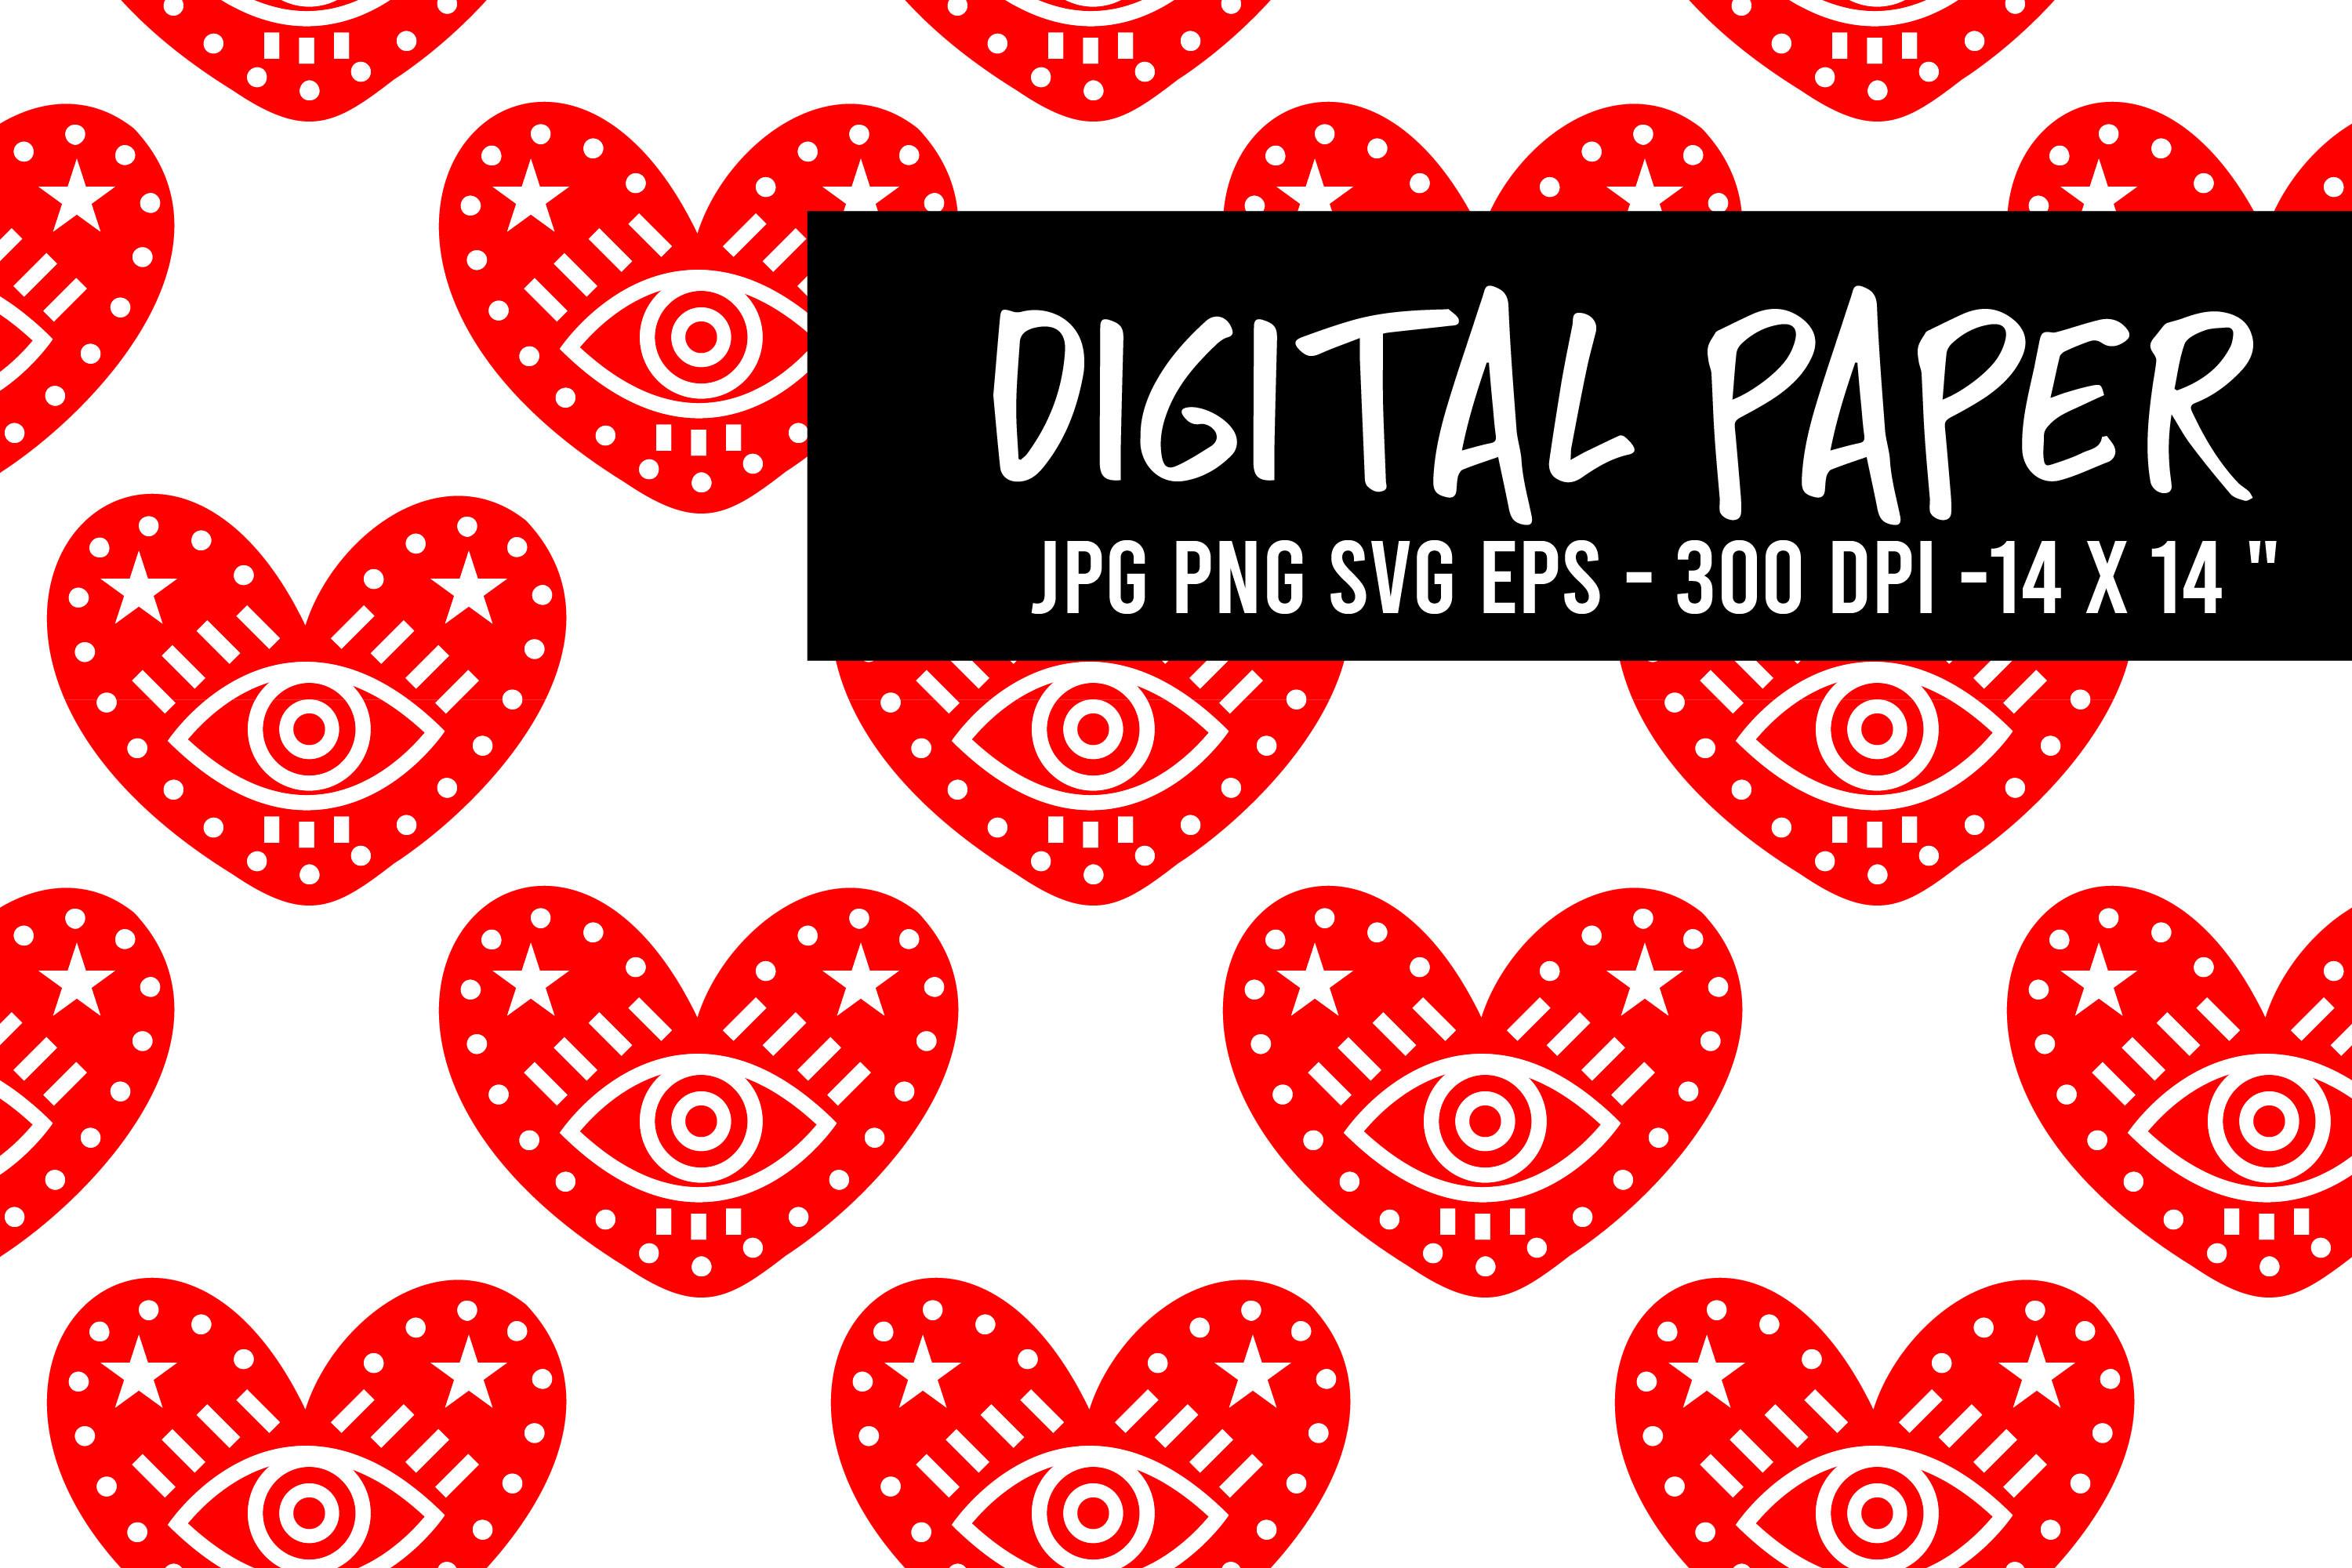 Modern Digital Paper with Hearts